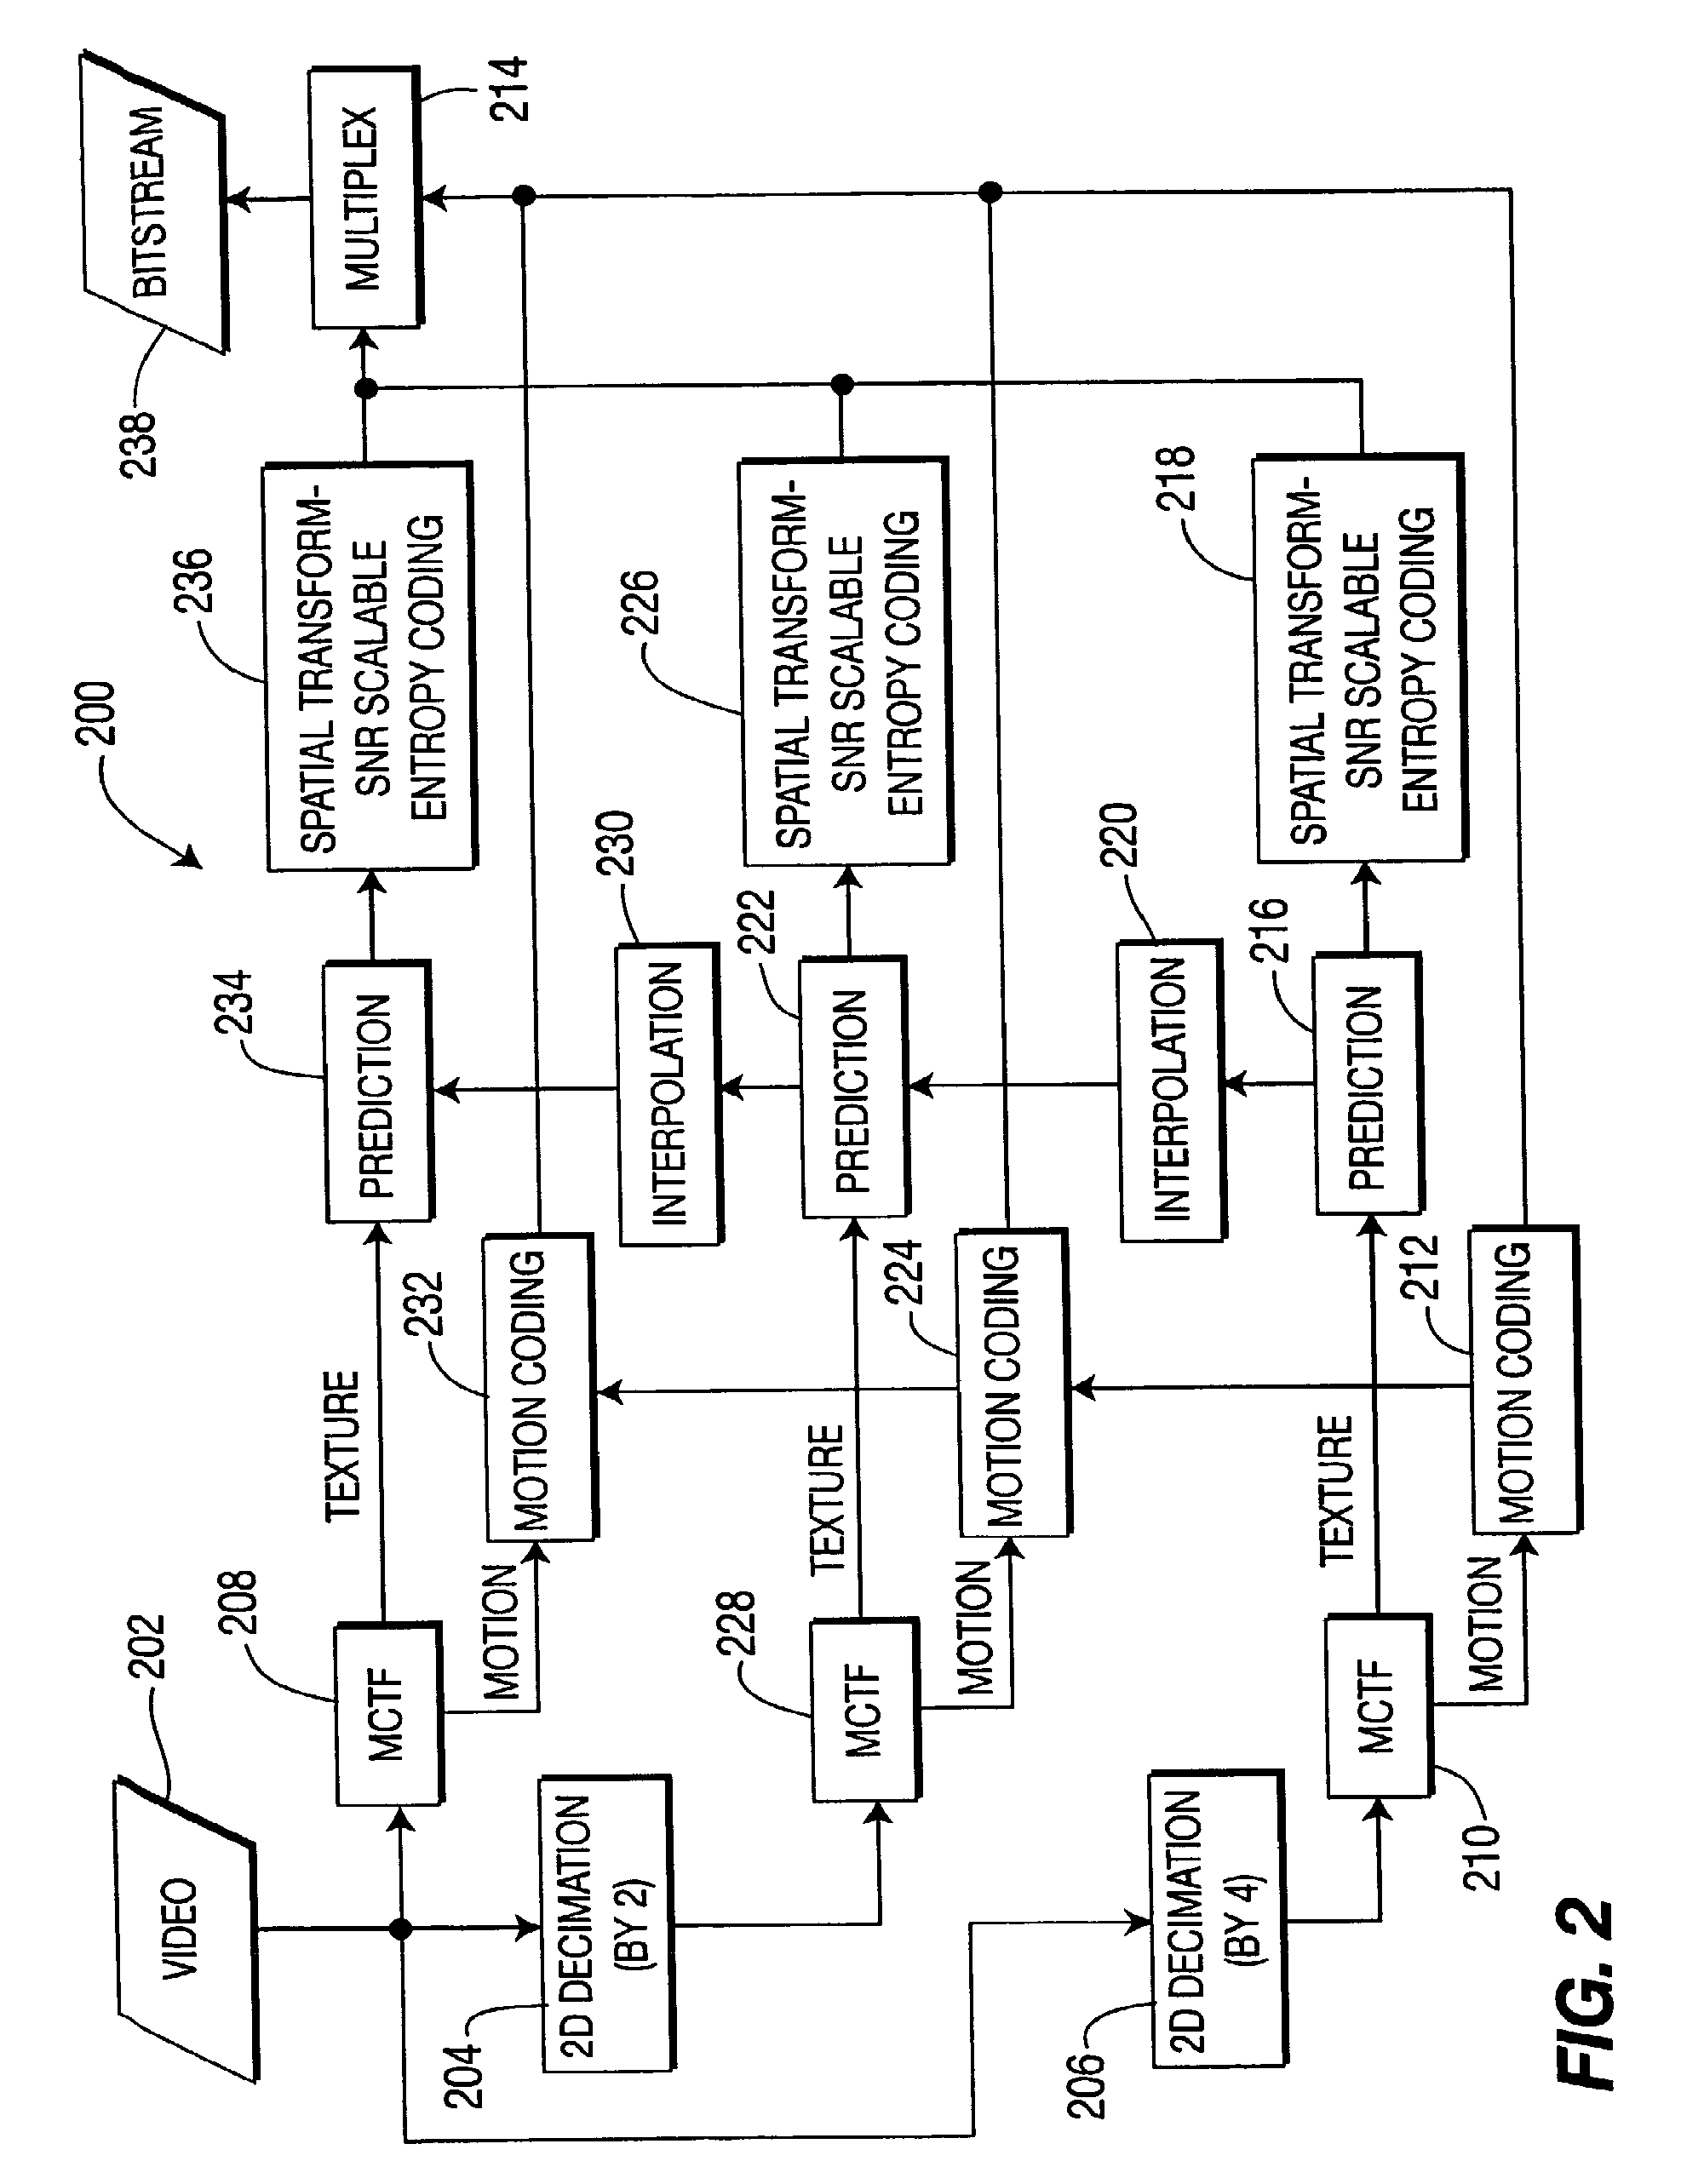 Method and Apparatus for Using High-Level Syntax in Scalable Video Encoding and Decoding